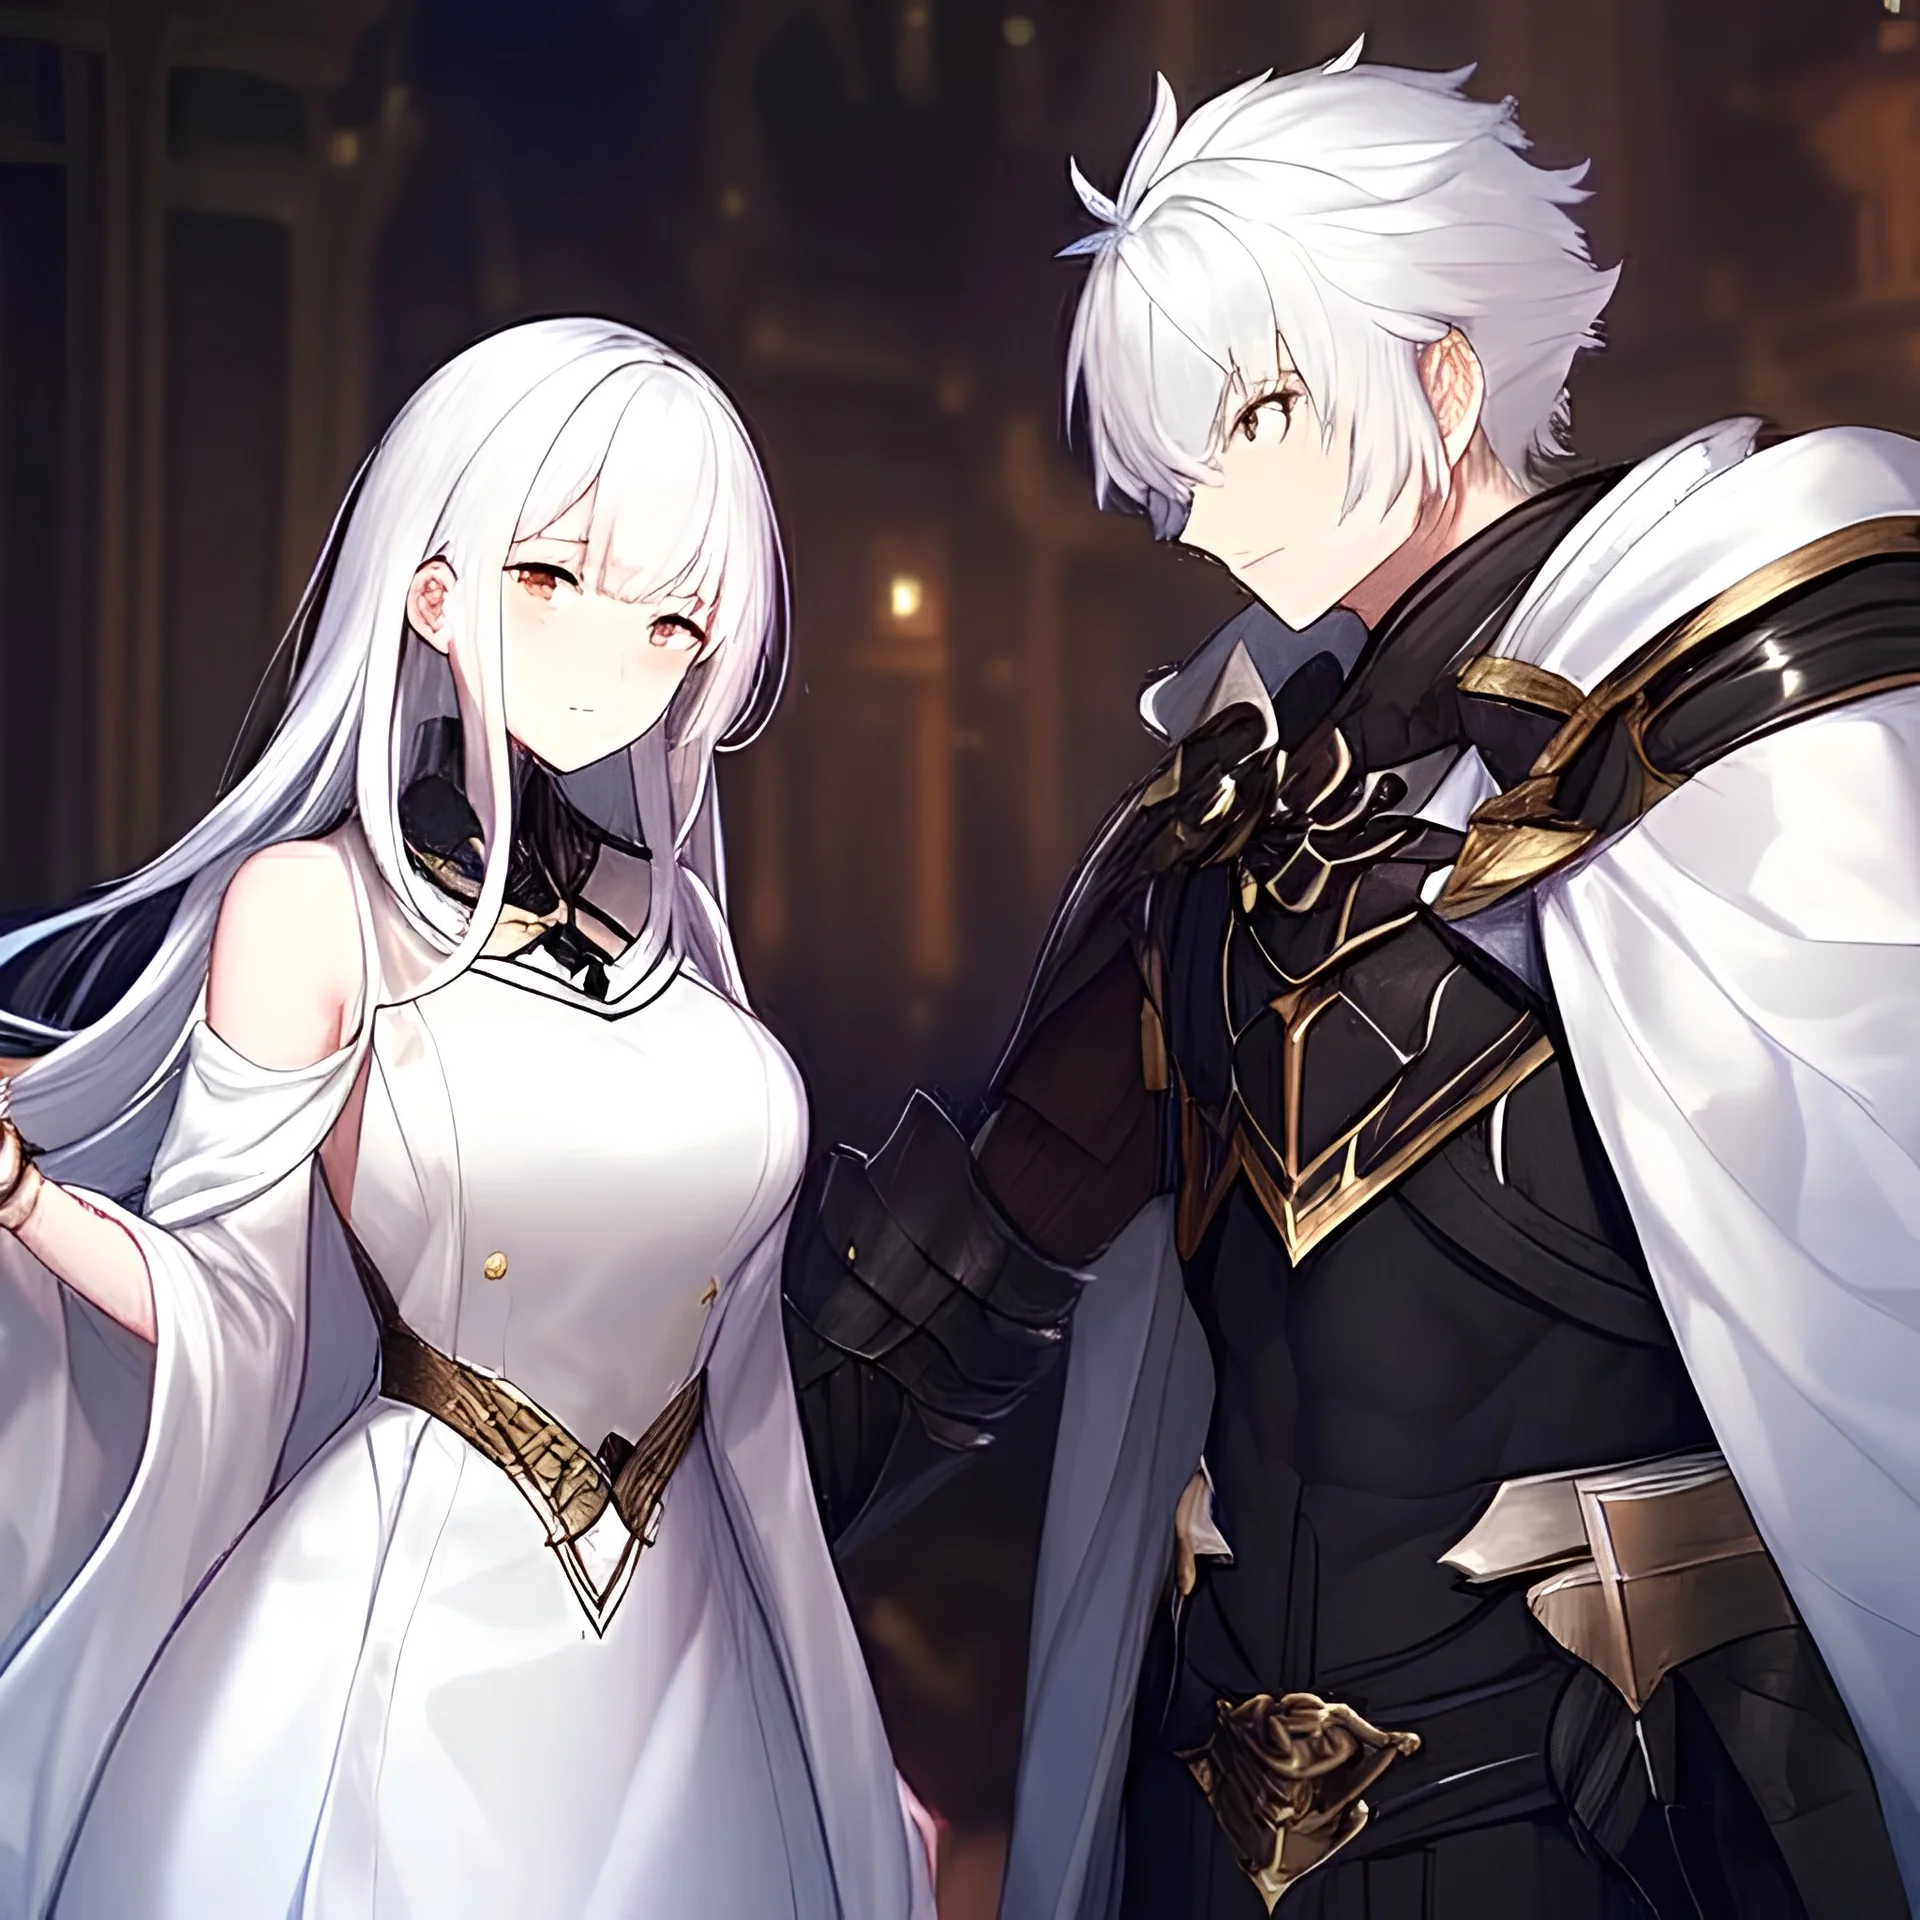 Girl with white hair wearing white robes. Boy with black hair wearing leather armor